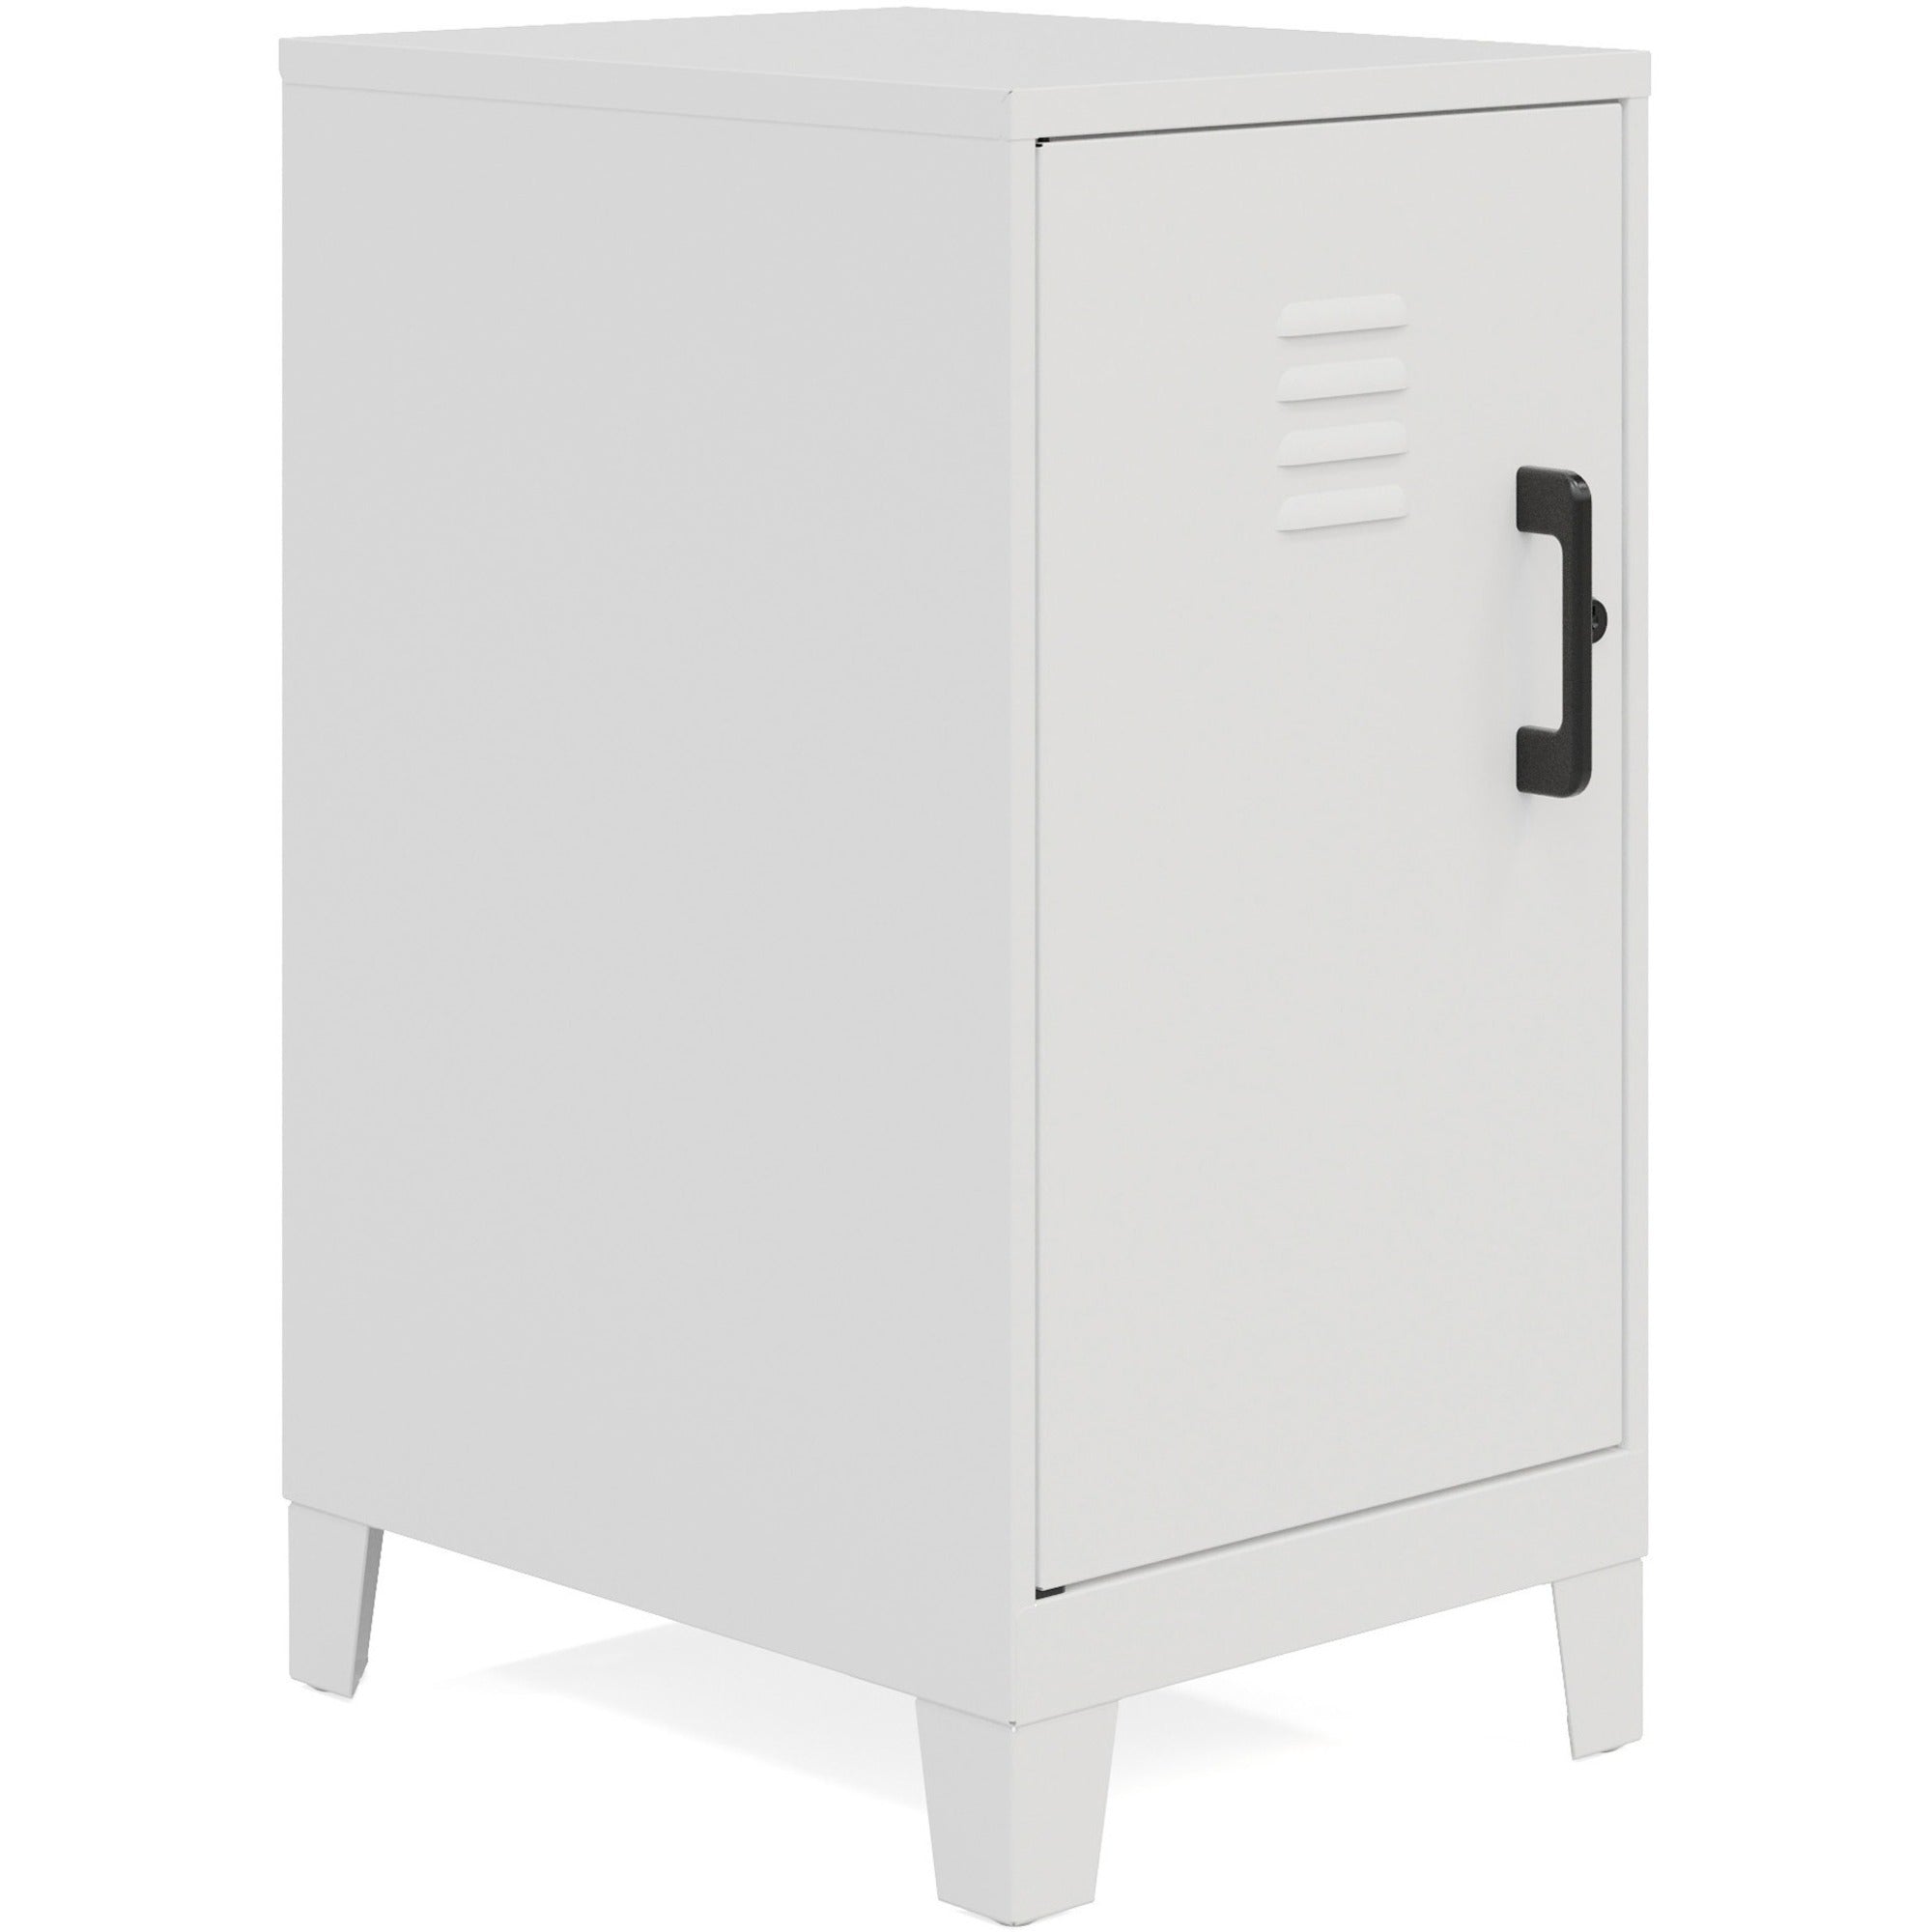 nusparc-personal-locker-2-shelves-for-office-home-sport-equipments-toy-game-classroom-playroom-basement-garage-overall-size-275-x-142-x-18-white-steel-taa-compliant_nprsl218zzwe - 1